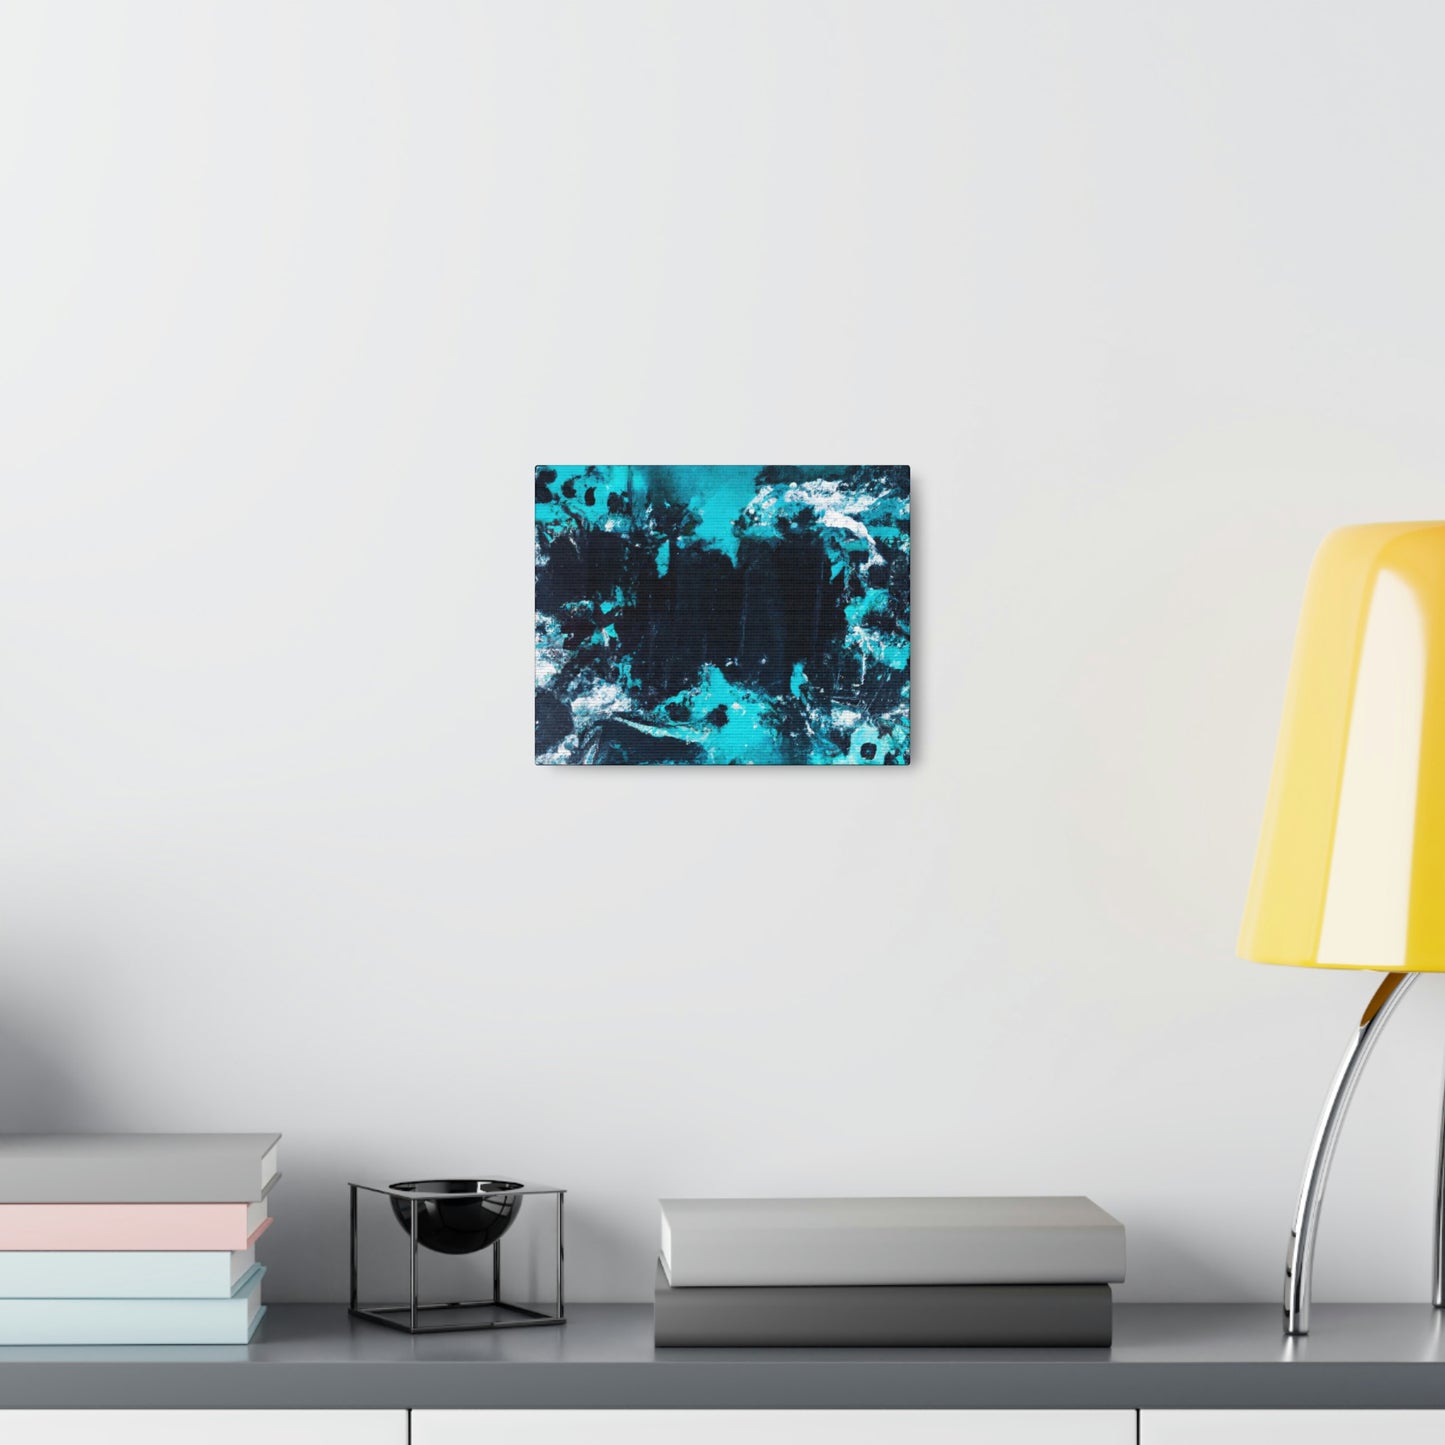 Ultra Modern Luxury Turquoise Gallery Wrap Canvas